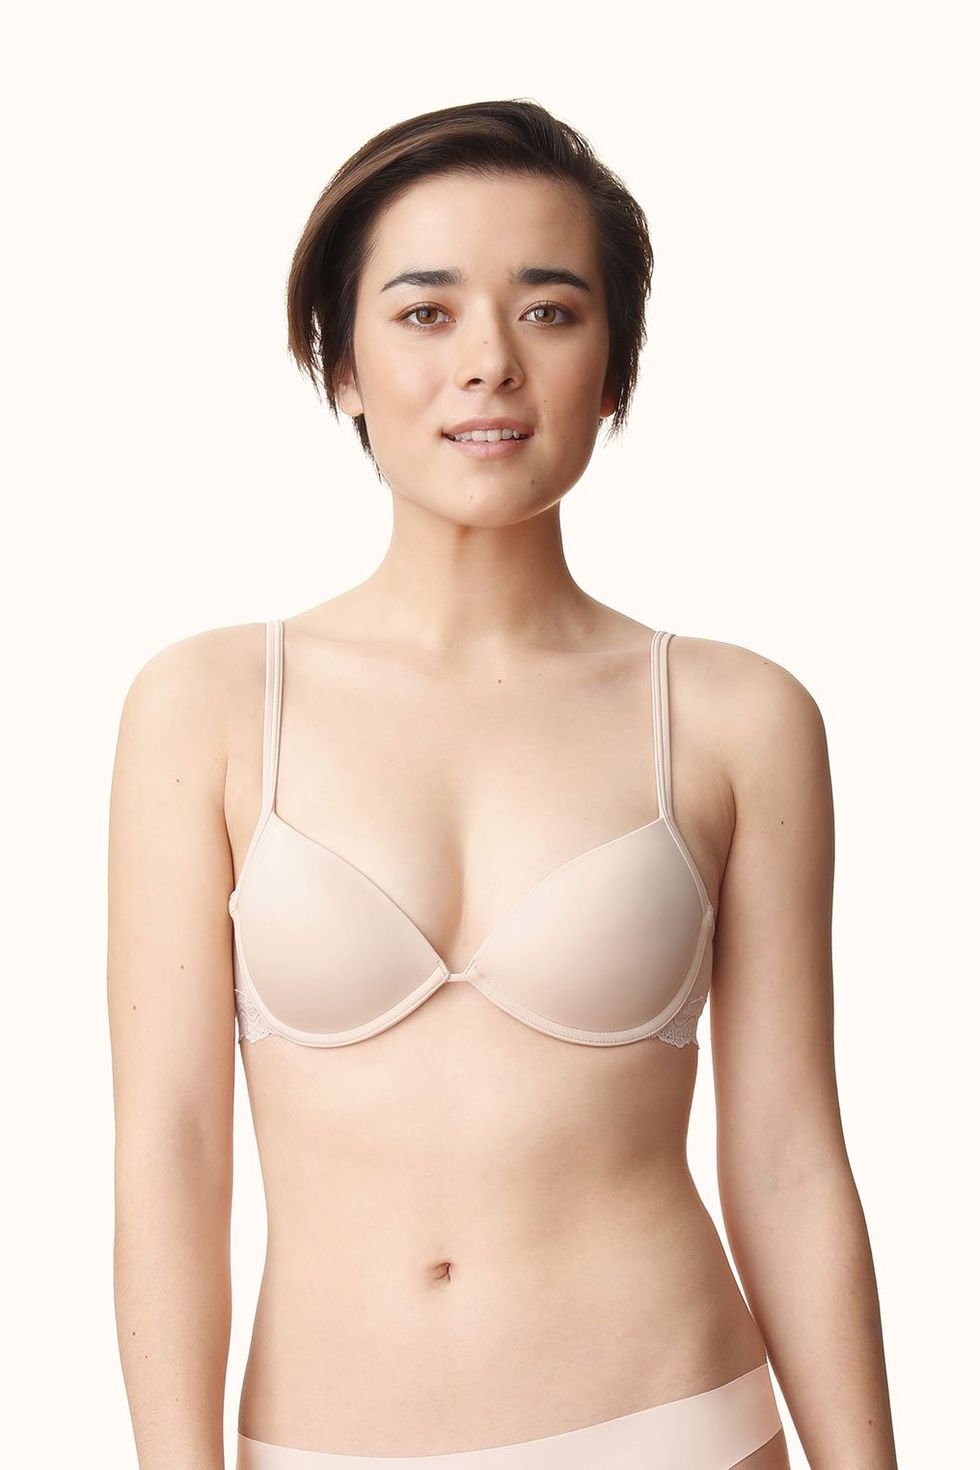 Bikini Tops for Small Busts in AAA, AA and A Cup Sizes